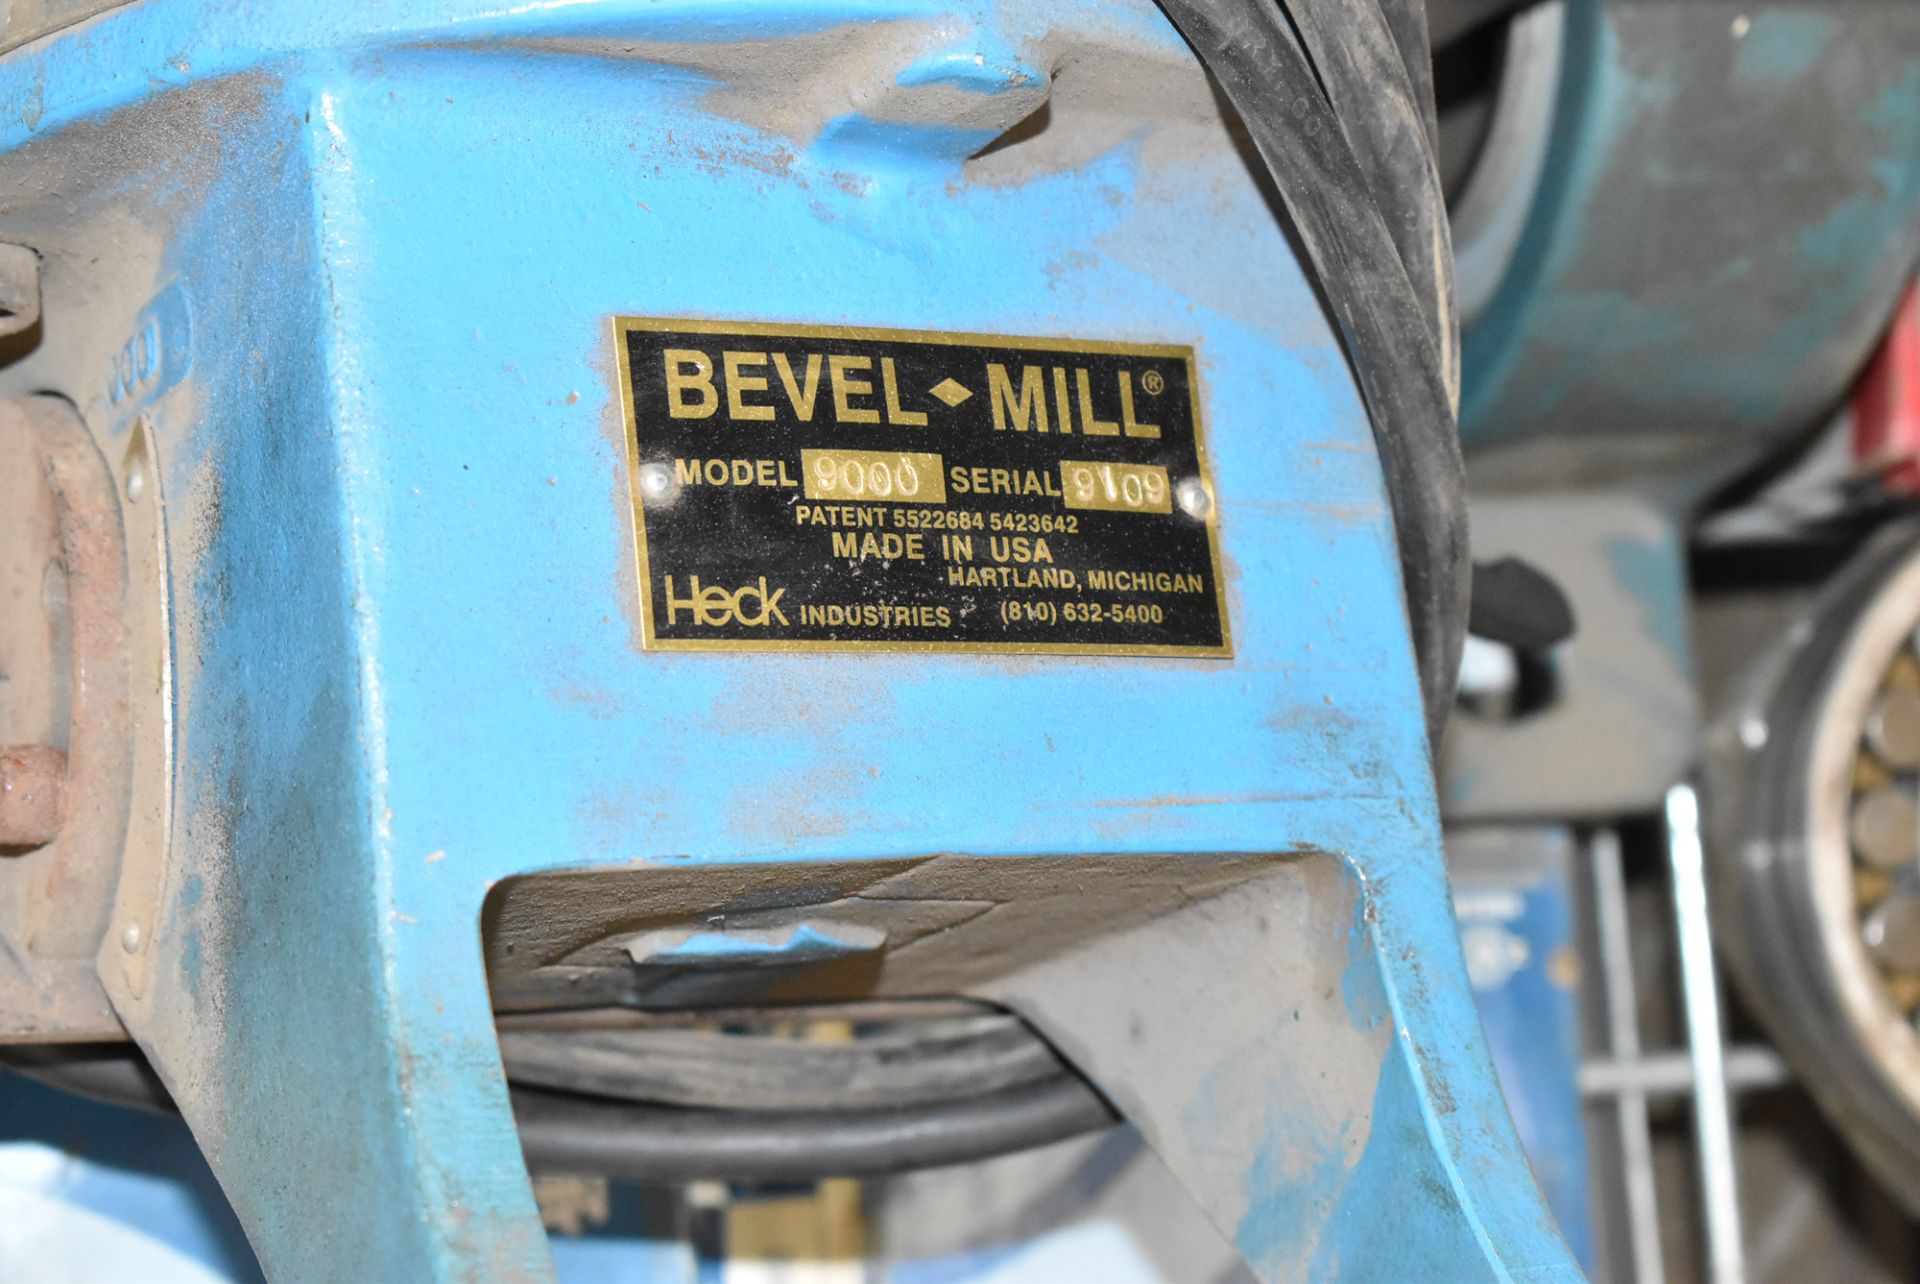 BEVEL-MILL MODEL 9000 PORTABLE ELECTRIC PLATE BEVELLER WITH 115V/1PH/50-60HZ, S/N 9109 - Image 3 of 3